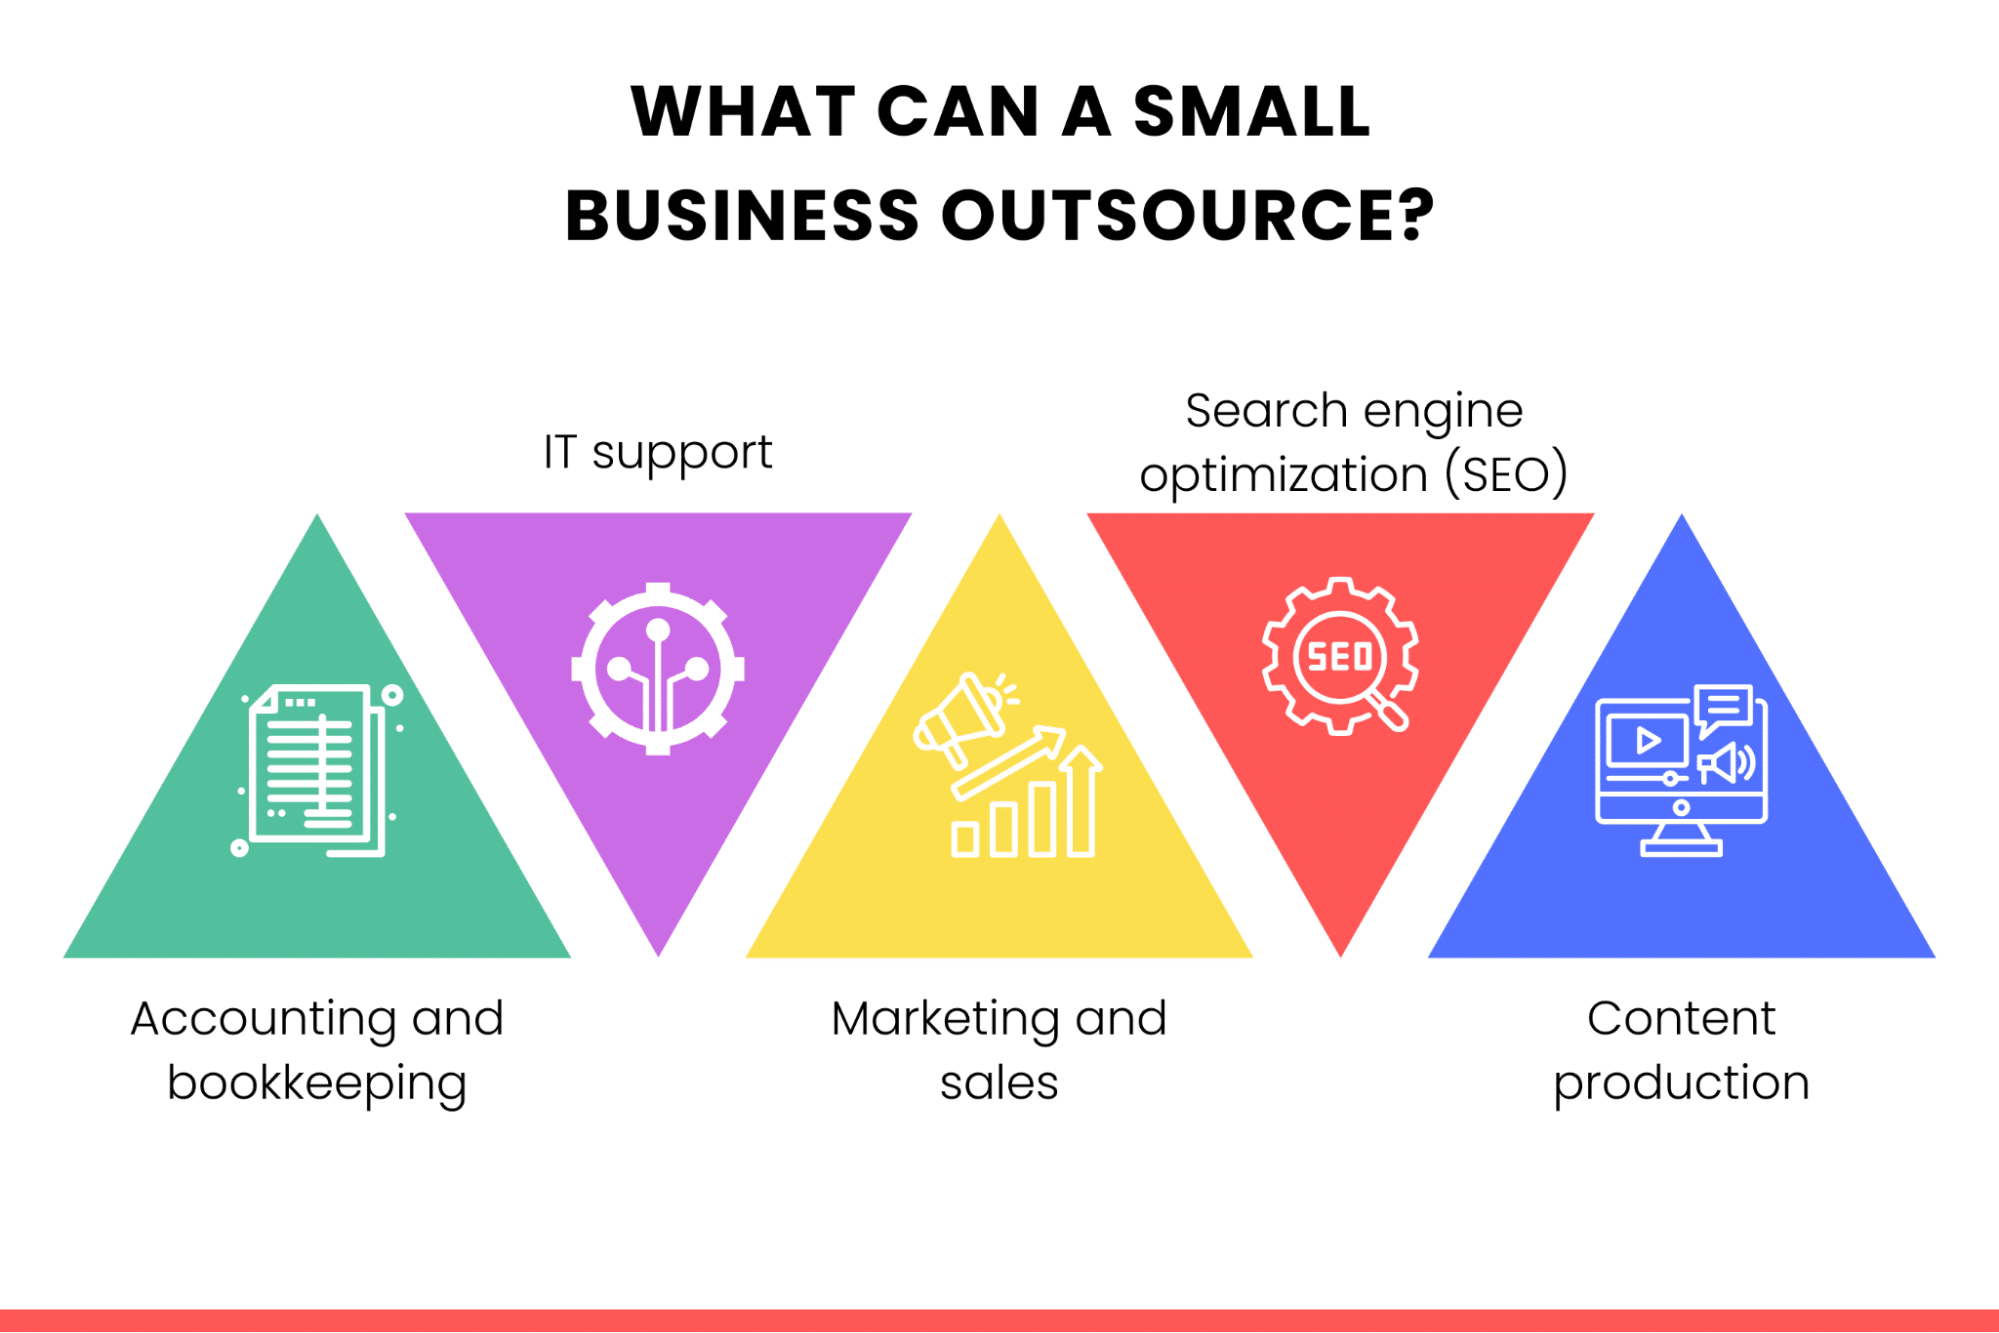 What Can a Small Business Outsource